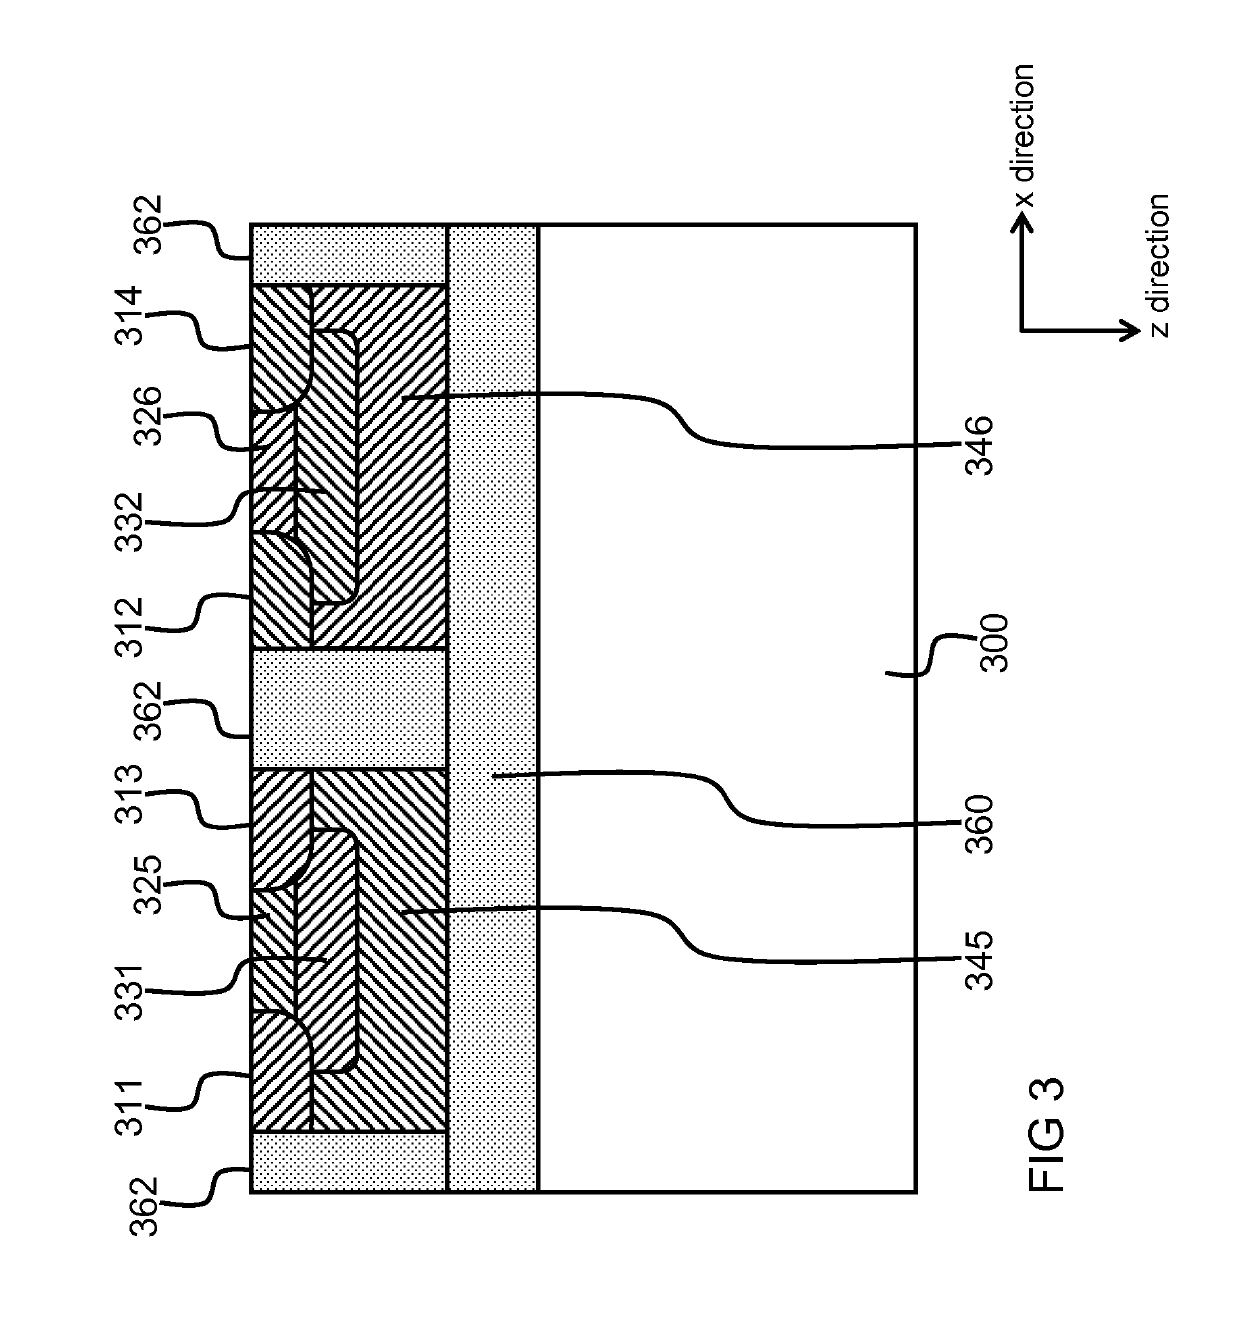 A semiconductor logic element and logic circuitries